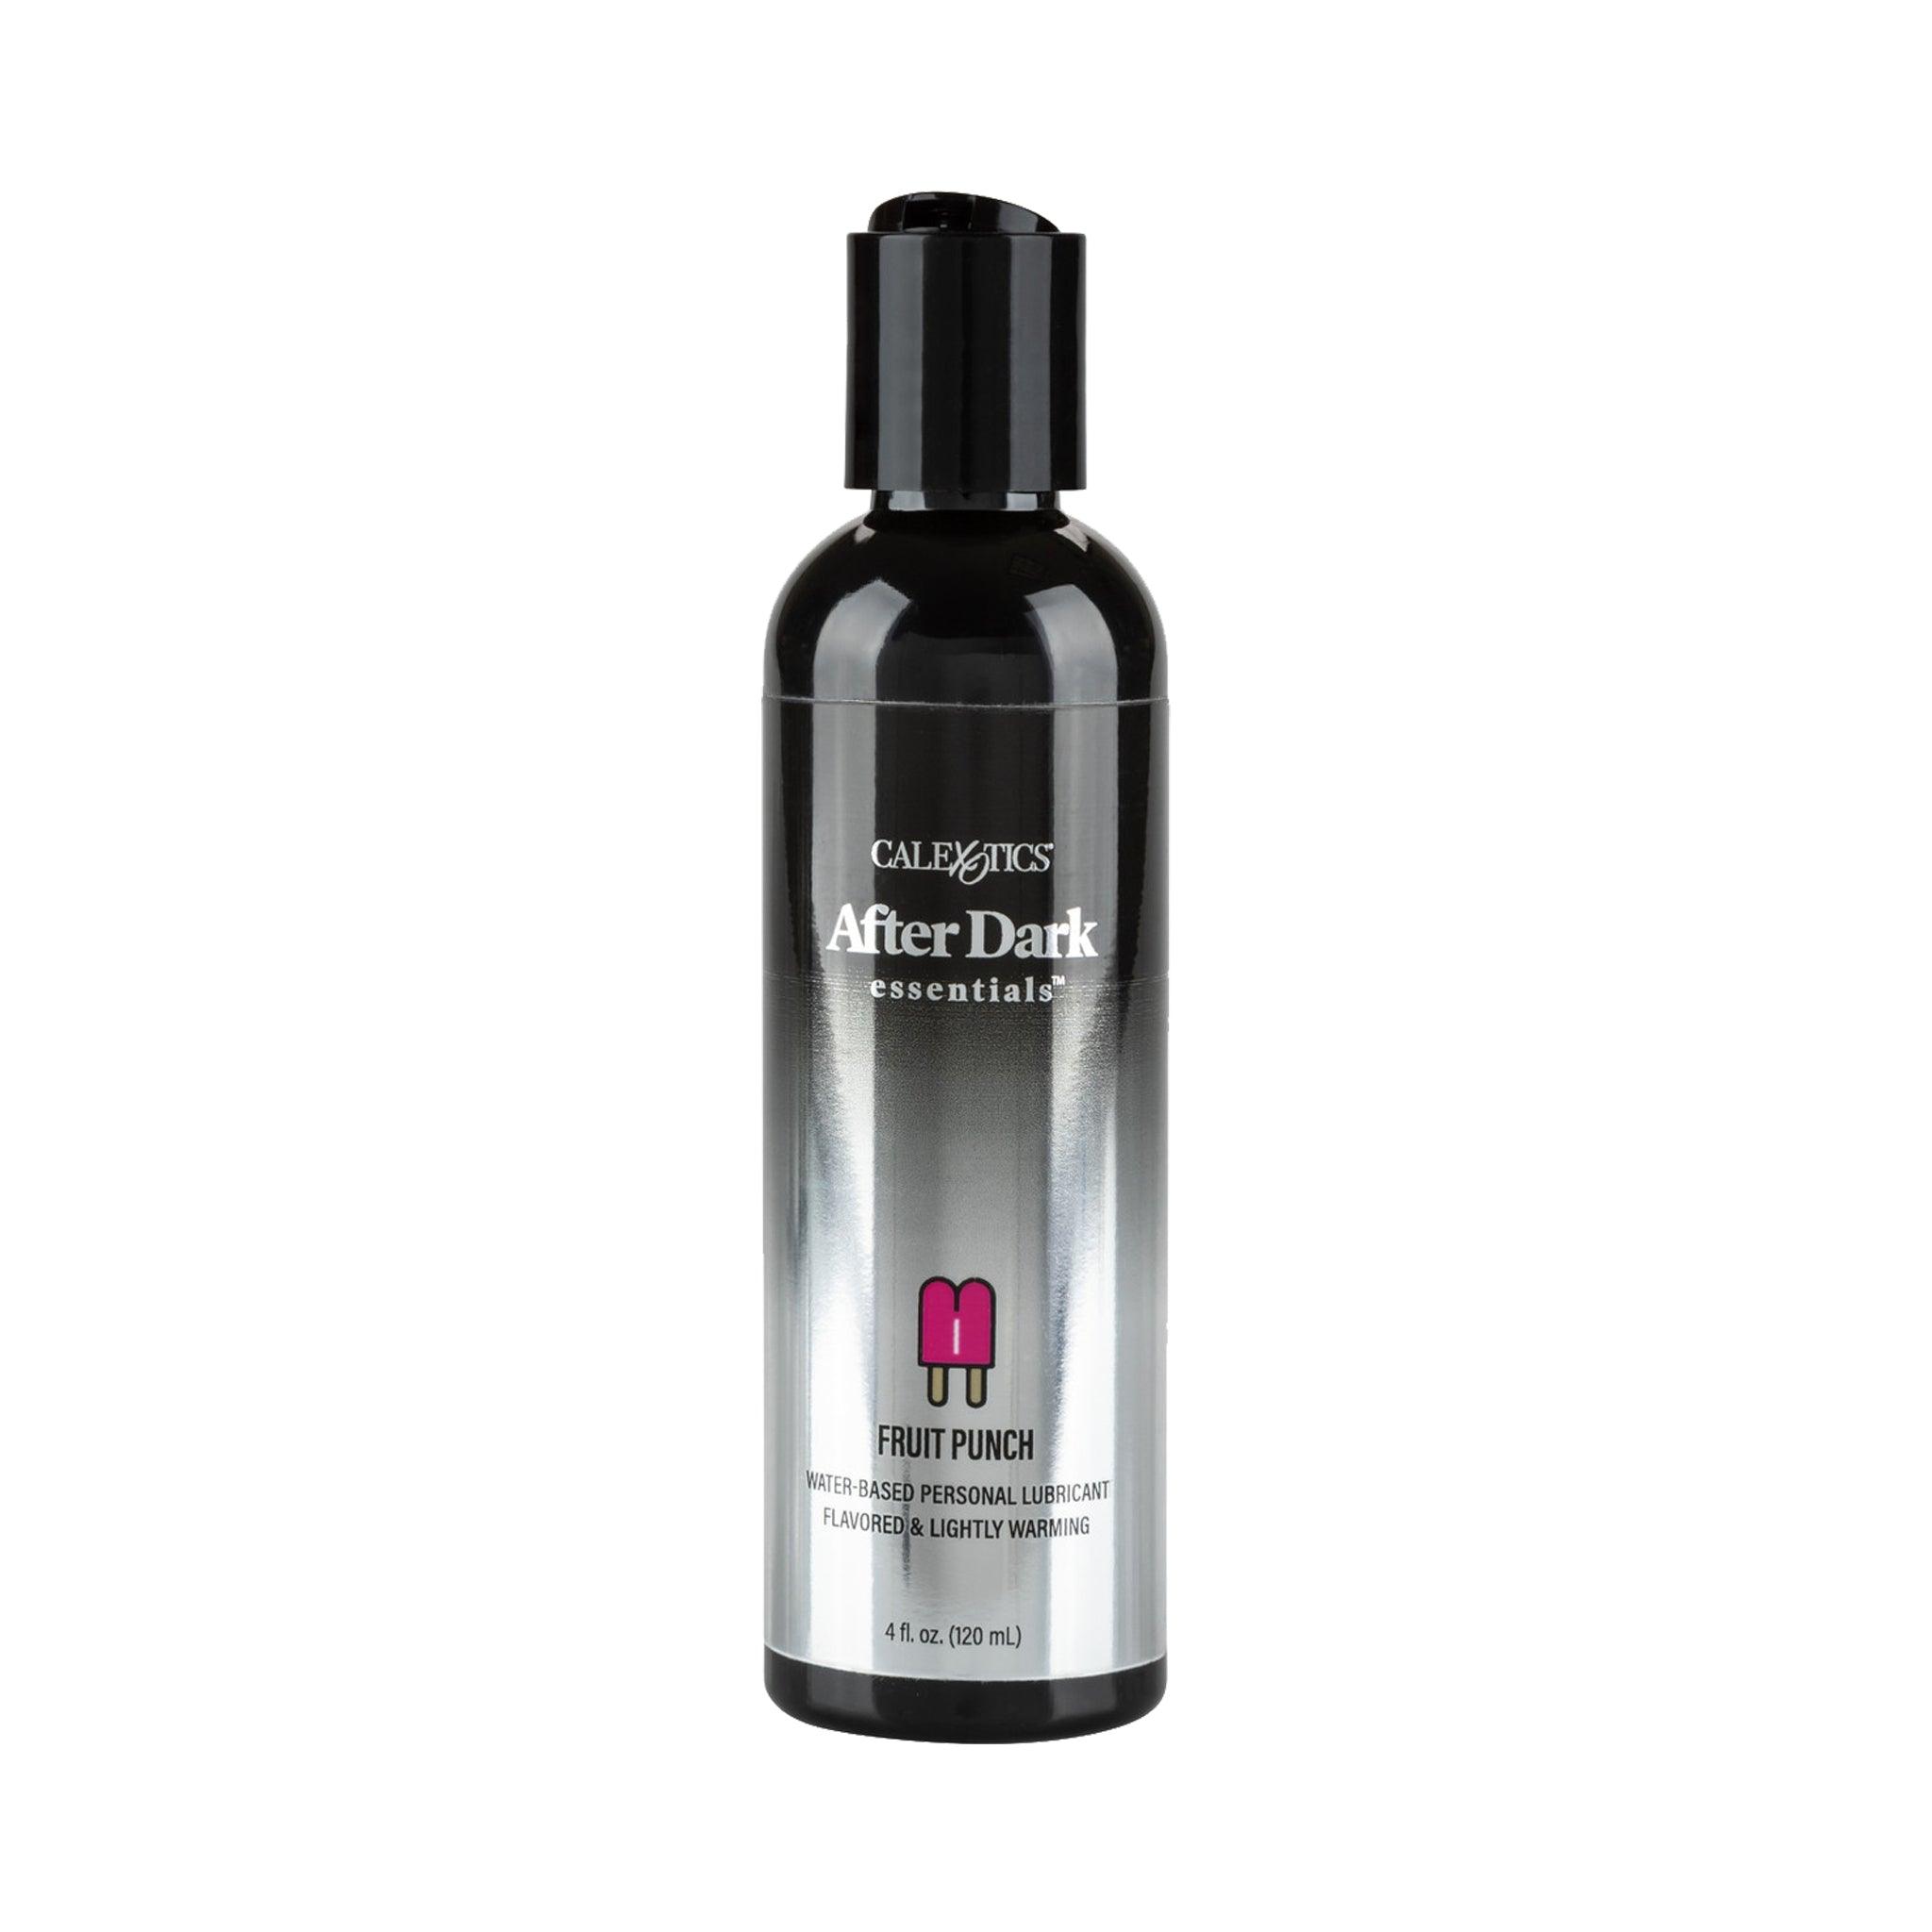 After Dark Essentials Flavored Personal Lubricant 4 oz (120 mL) 4 Flavors to Choose From - CheapLubes.com